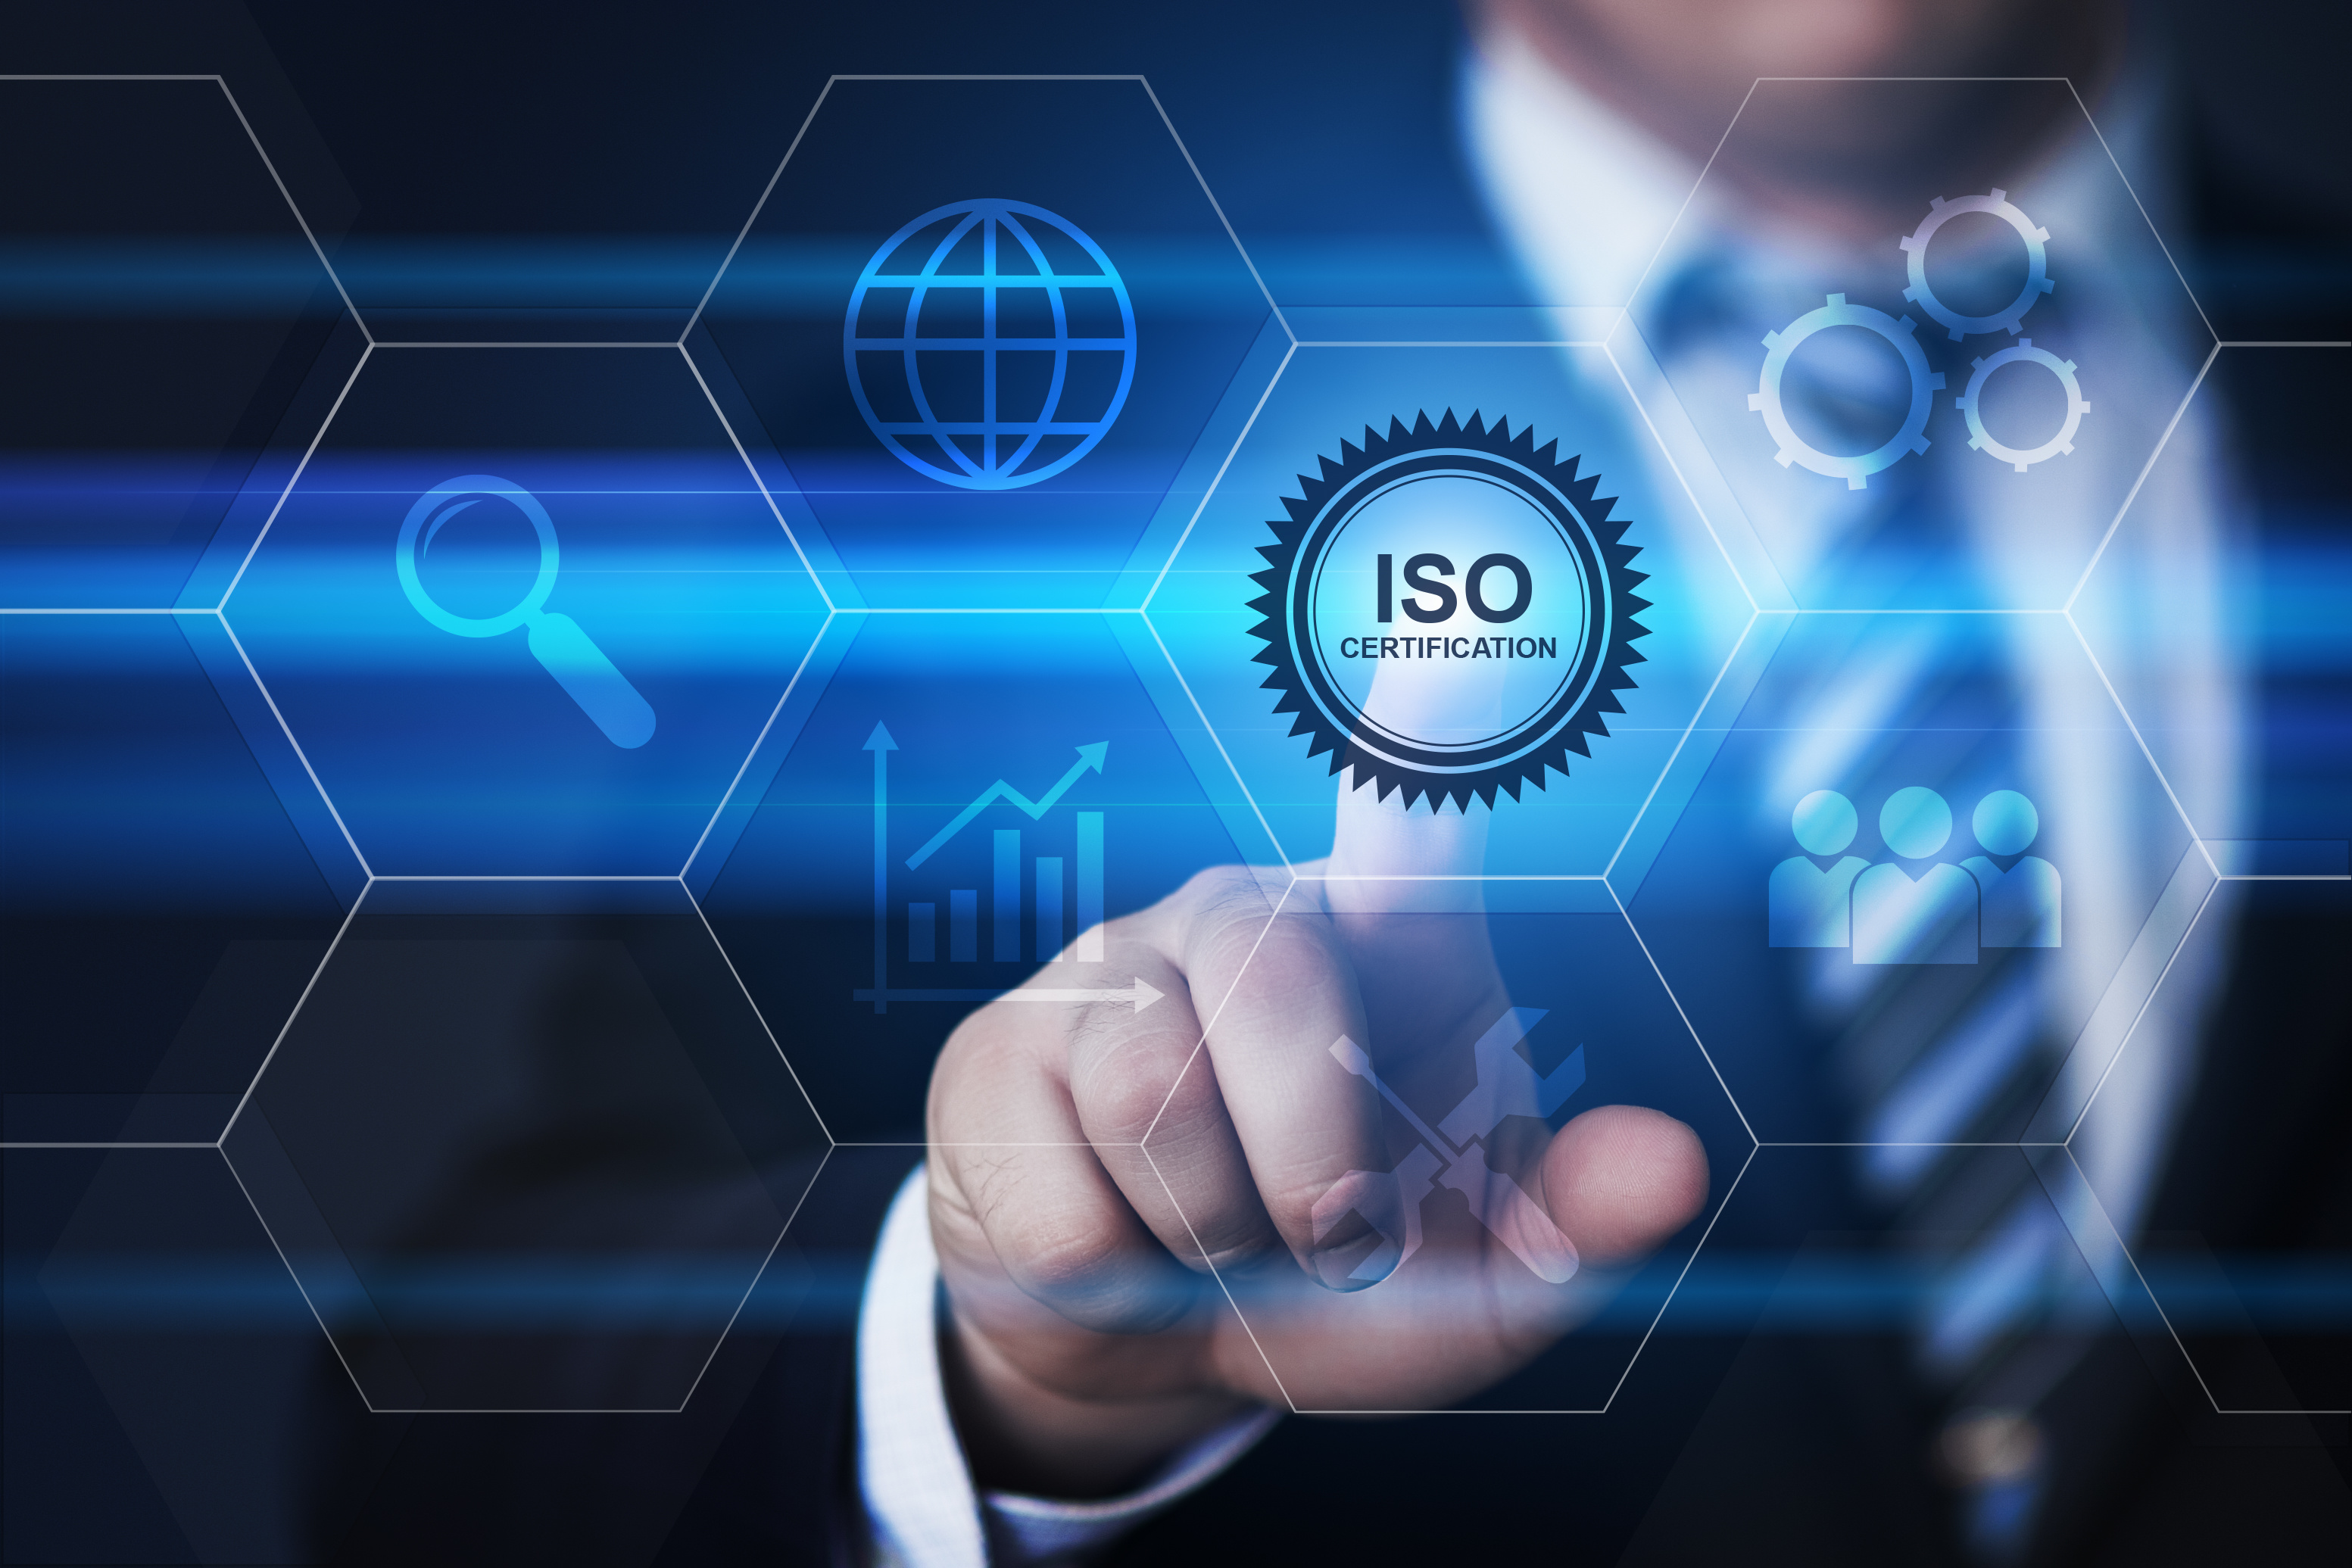 The International Organization for Standardization (ISO) has approved a new standard: ISO 45001